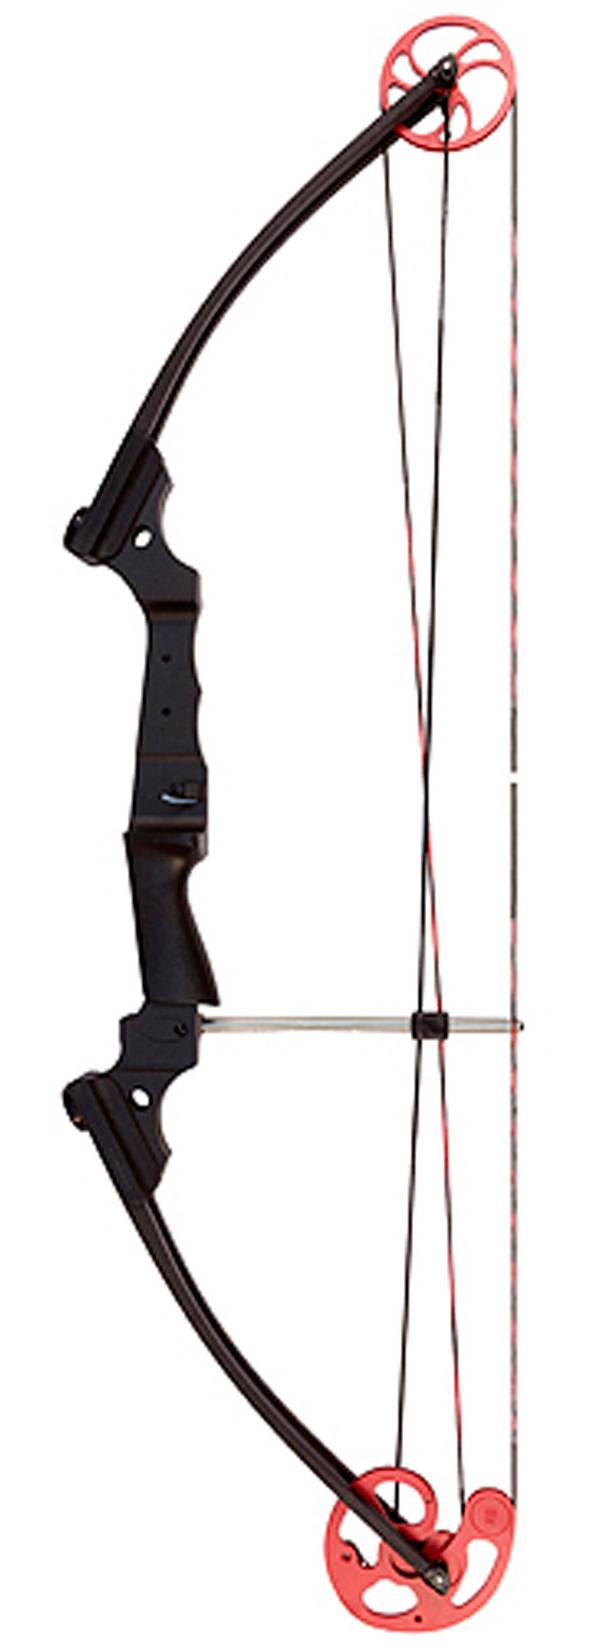 Genesis Youth Compound Bow Package product image